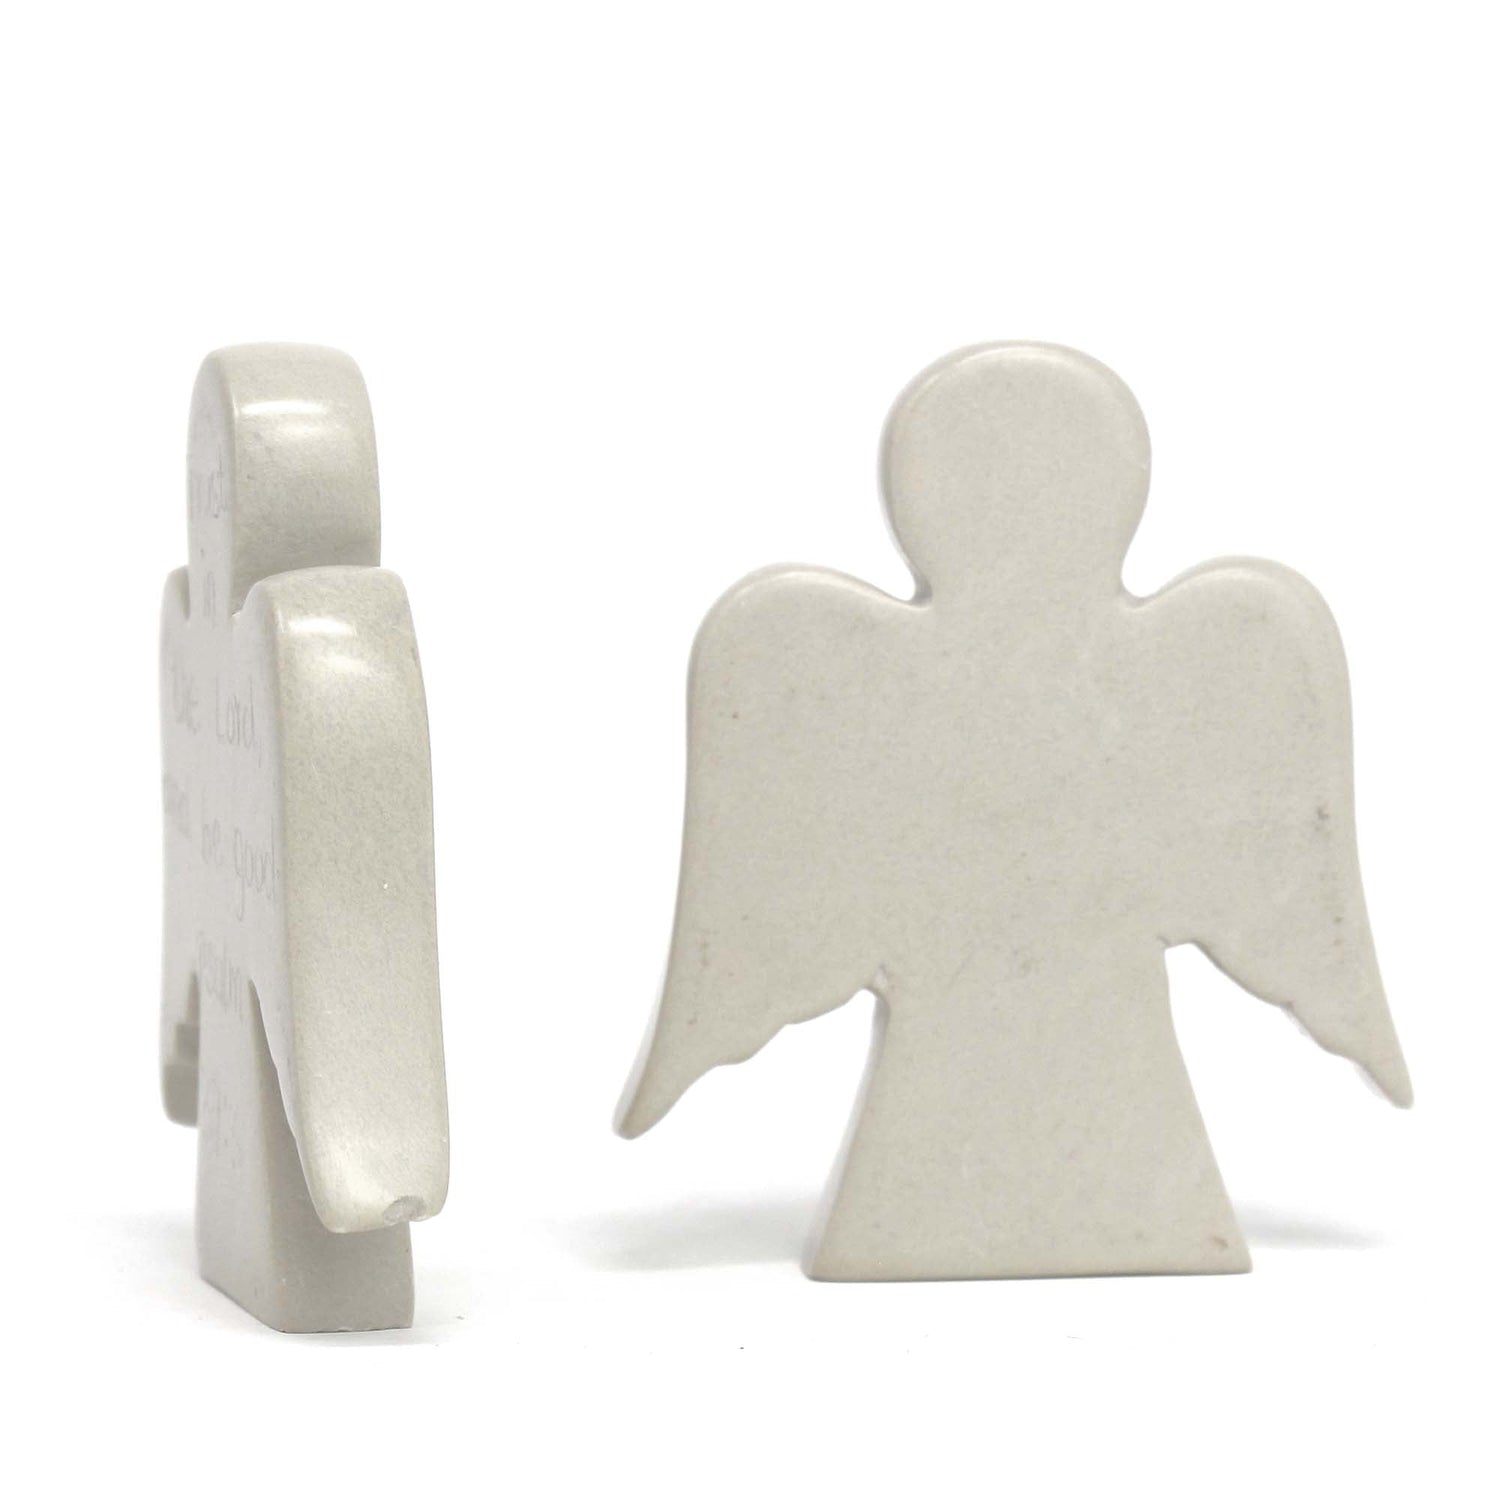 angel-devotional-tokens-with-psalm-inscriptions-set-of-2